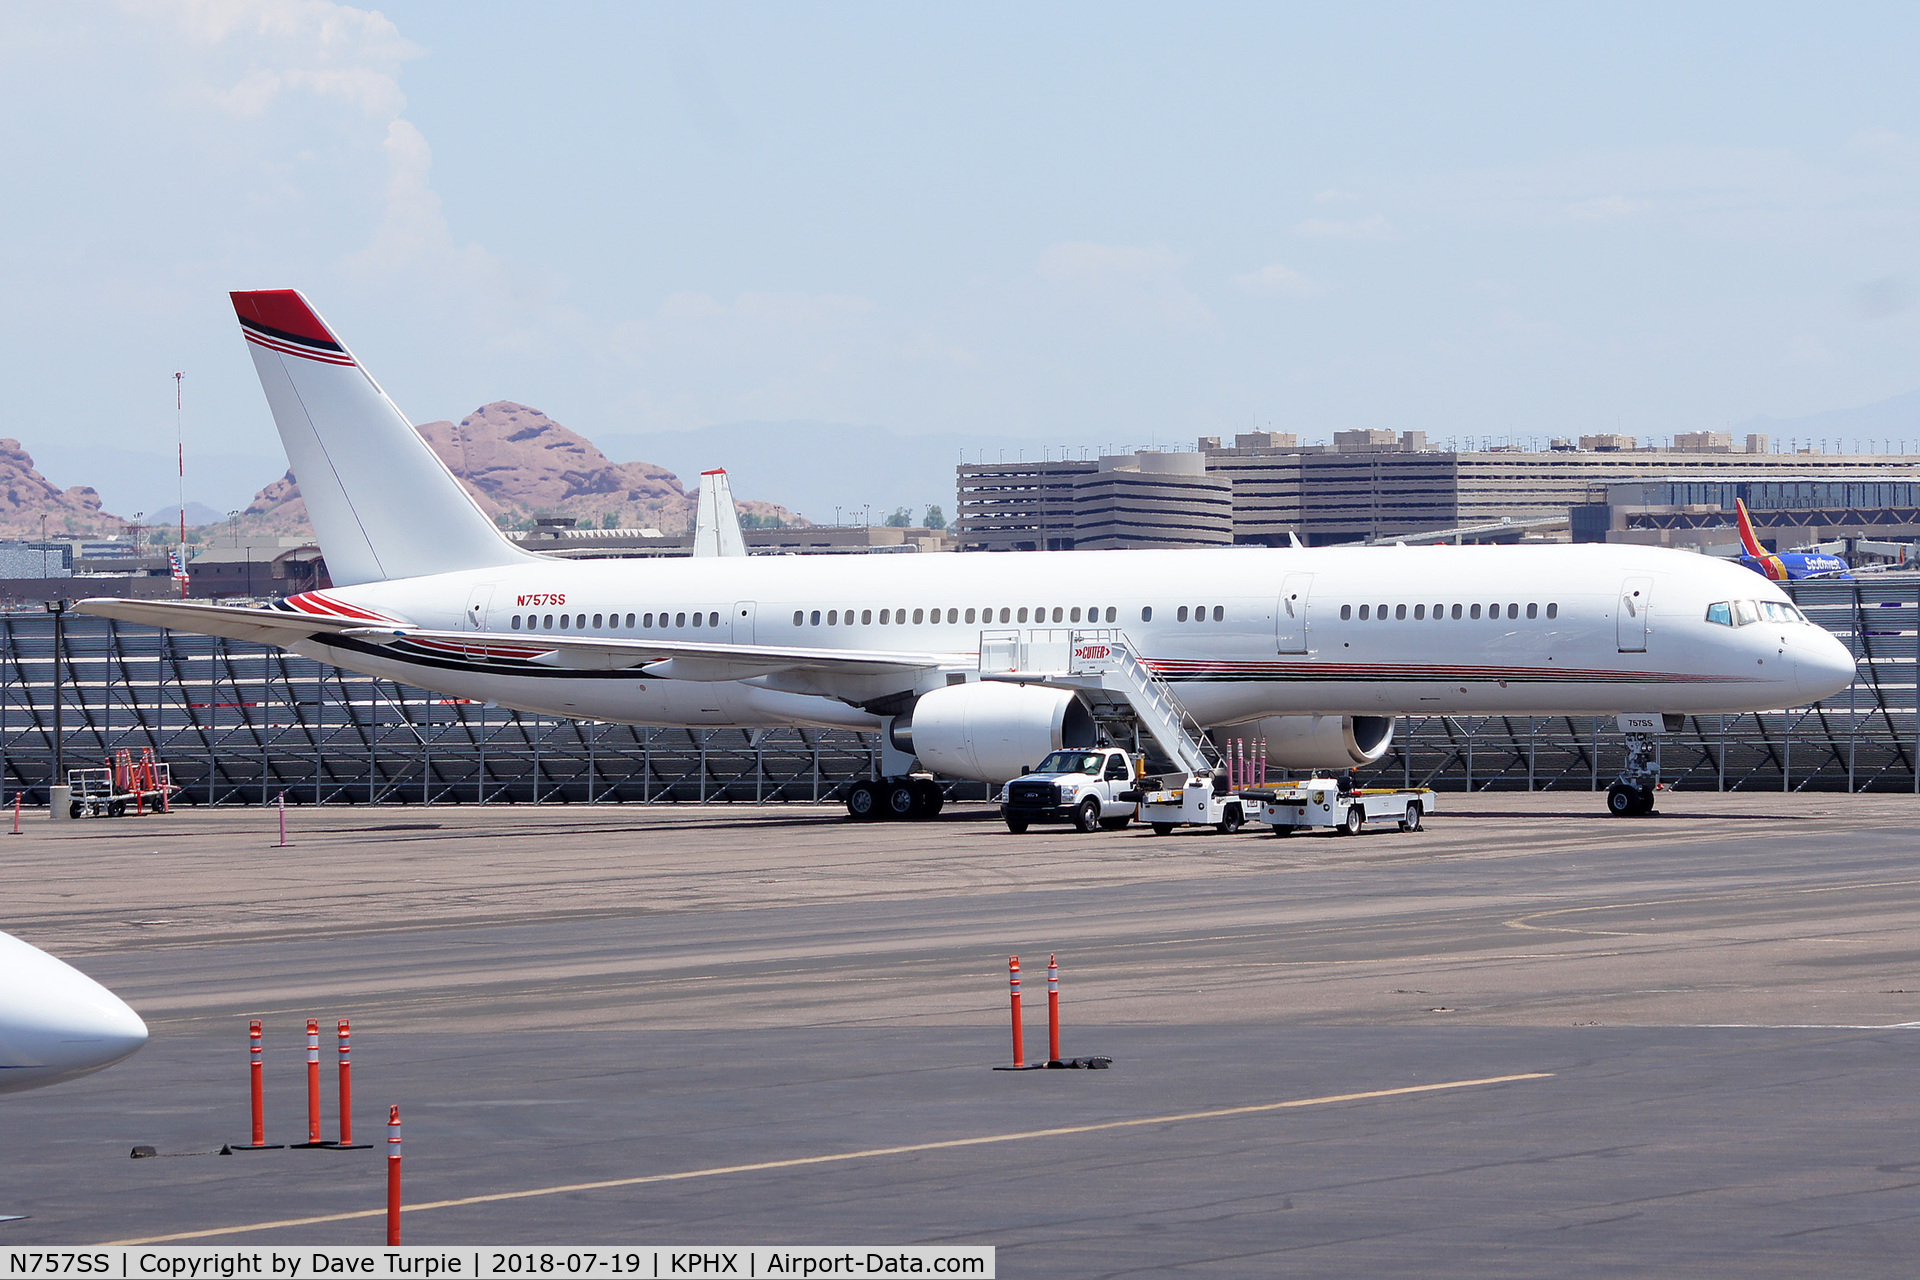 N757SS, 1983 Boeing 757-236 C/N 22176, This plane was used by the Houston Rockets in the 2017/2018 NBA season.